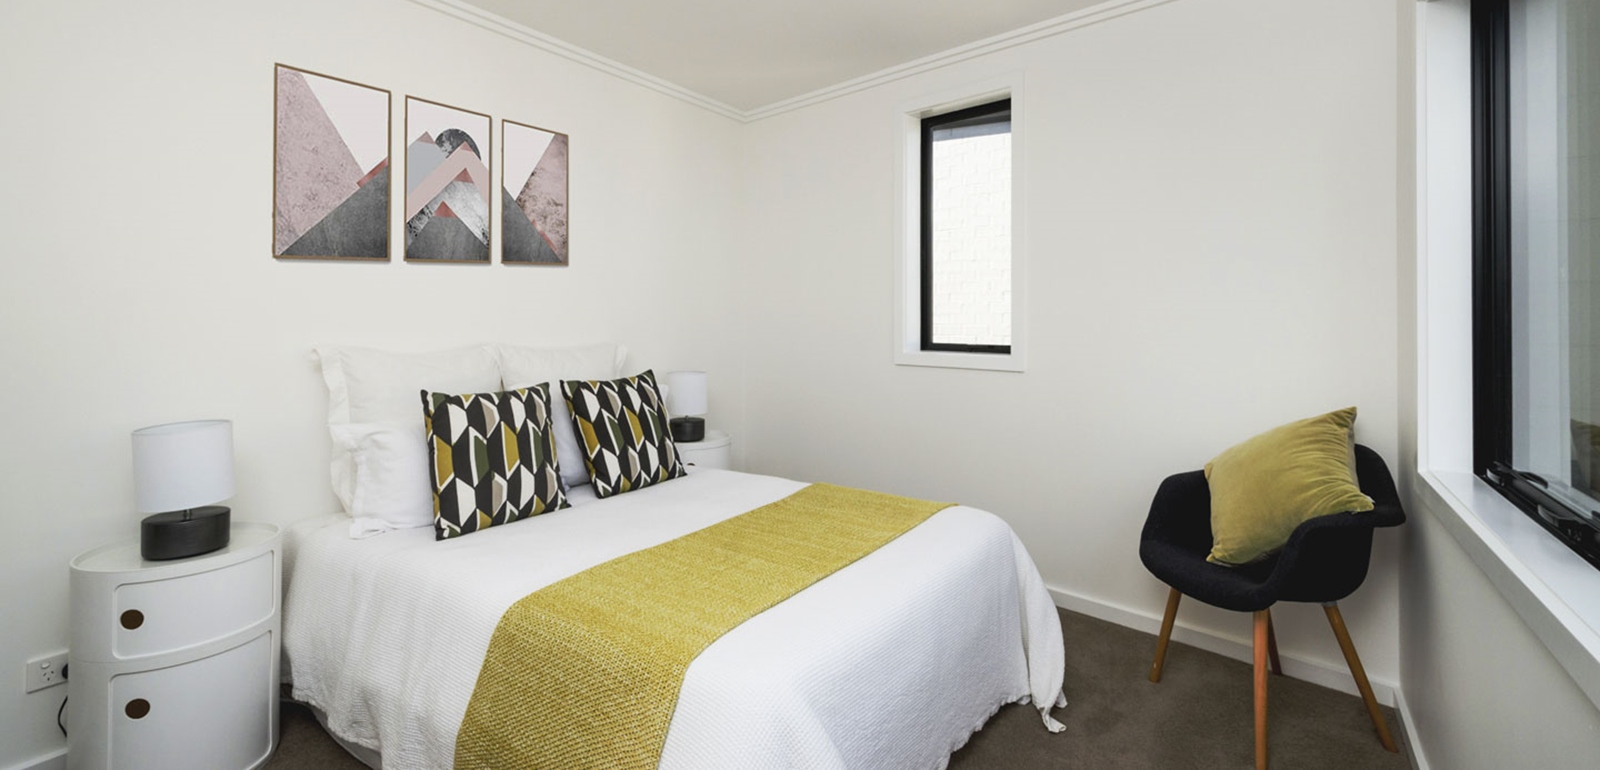 Downstairs bedroom at the Classic Builders Showhome in Hobsonville Point